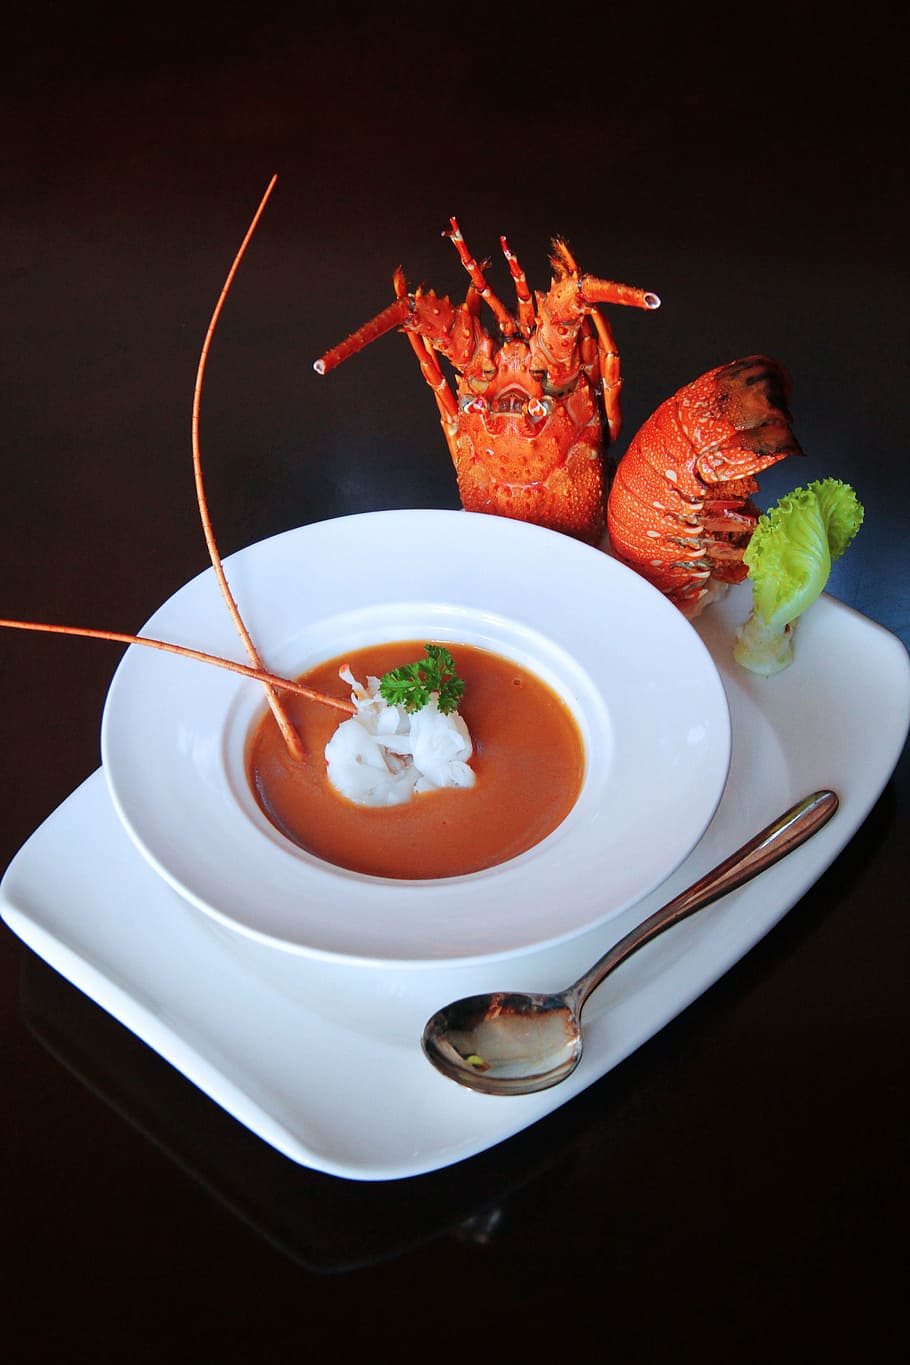 lobster soup, western, catering, hotel, food, gourmet, soup, seafood, plate, meal